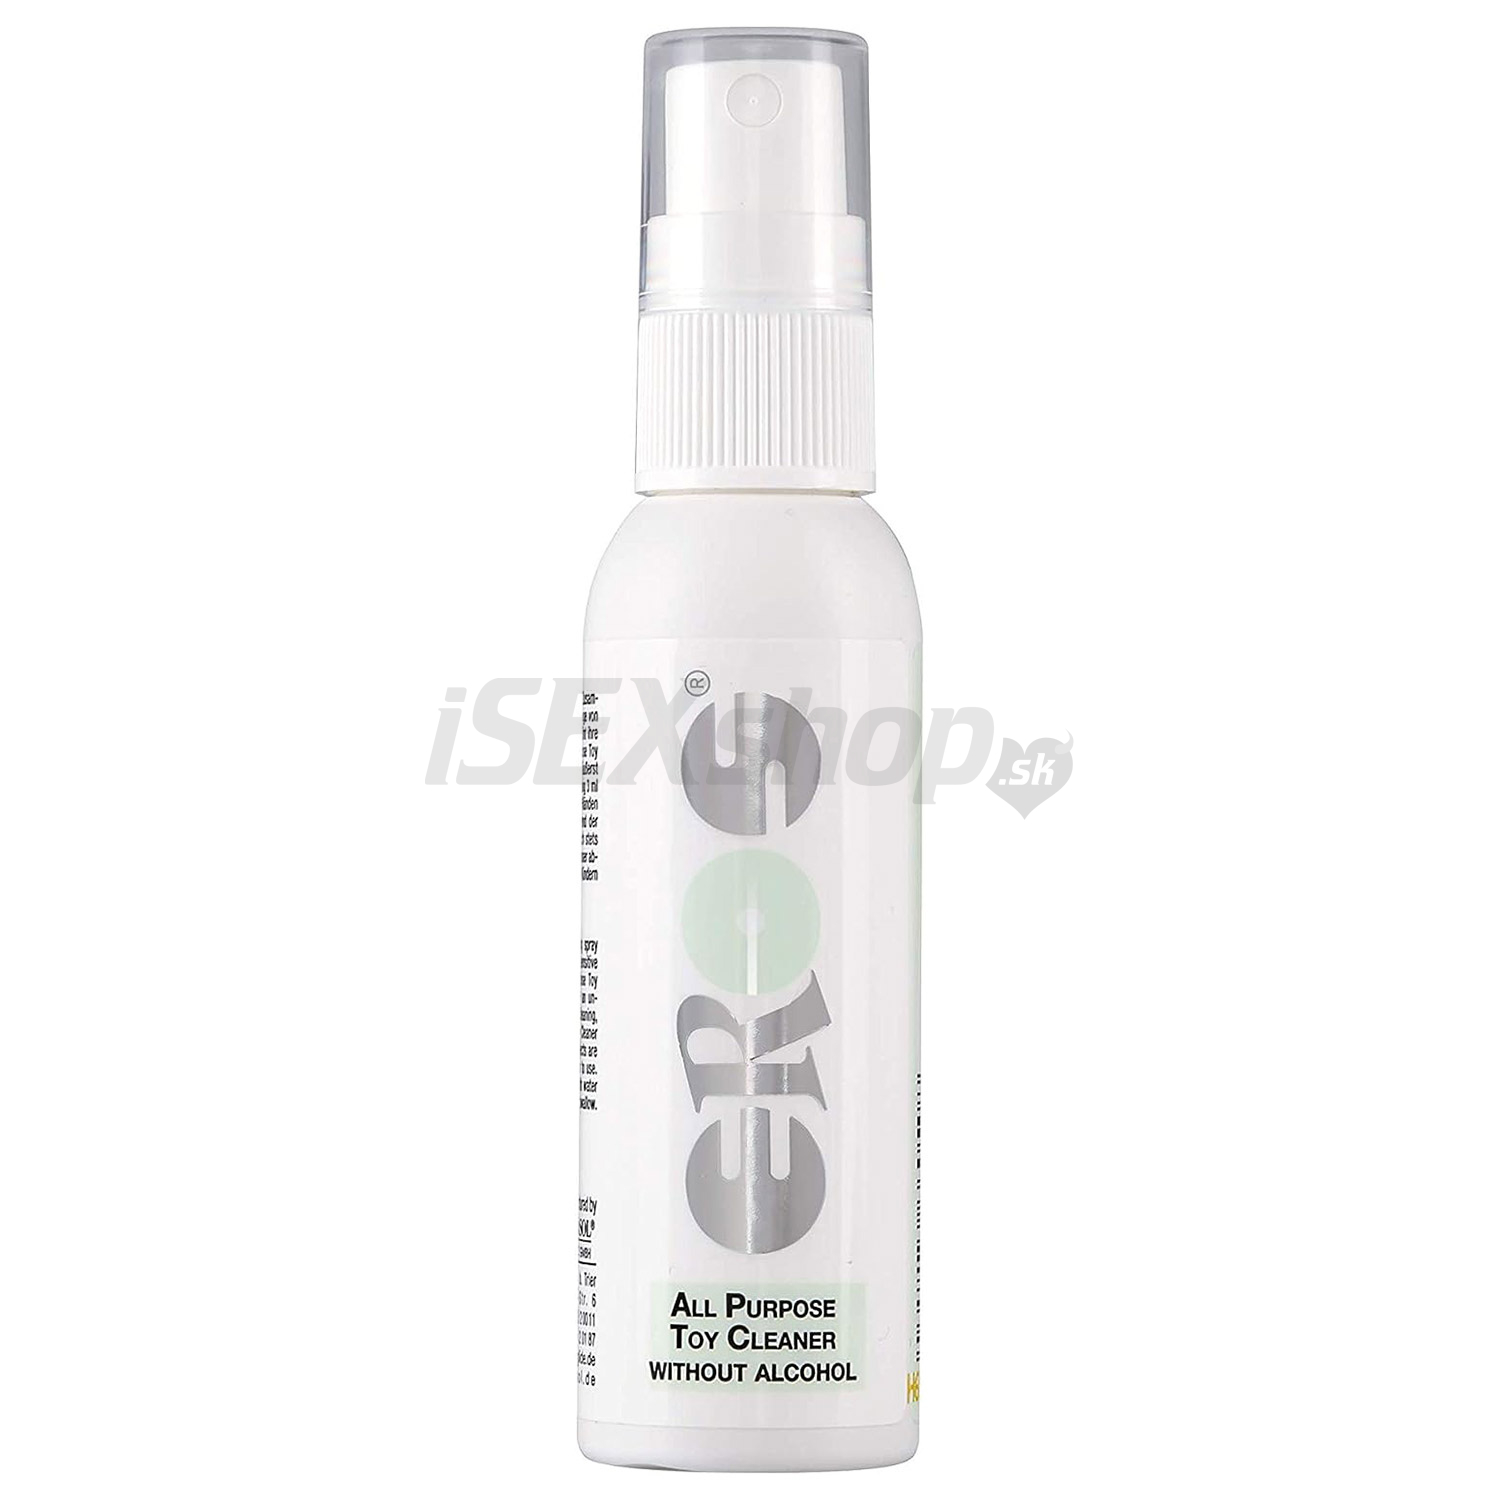 E-shop Eros All Purpose Toy Cleaner without Alcohol 50ml